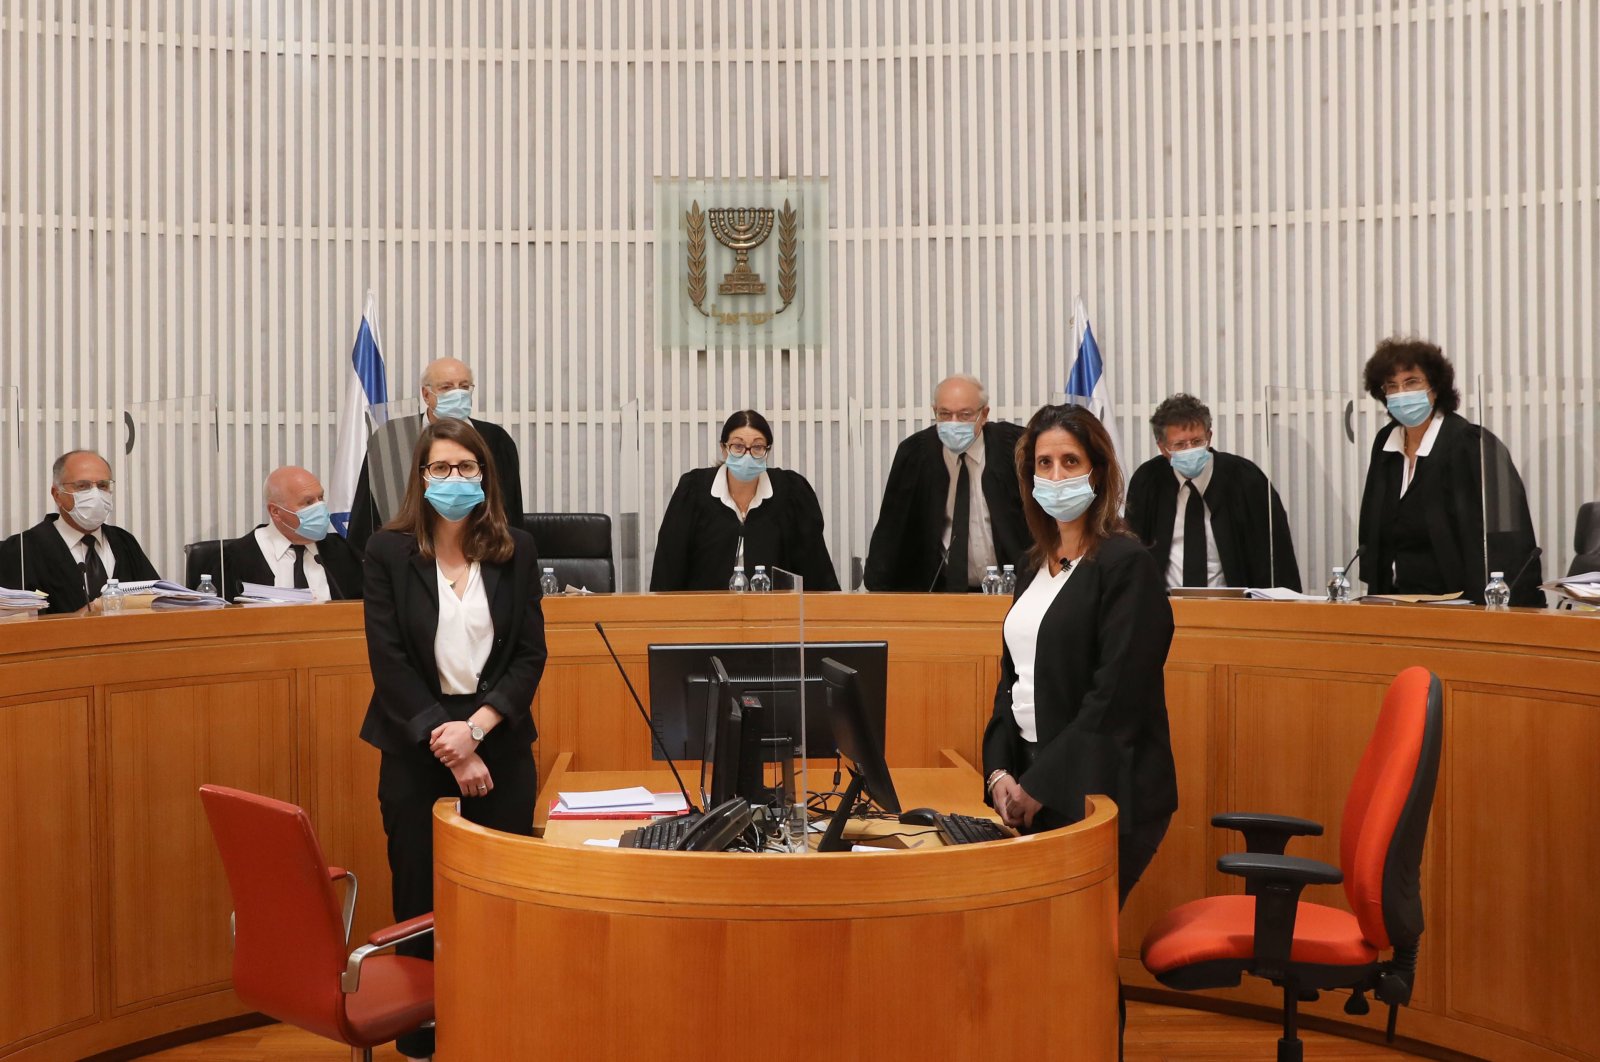 Judges and personnel of the Israeli Supreme Court wearing face masks against the coronavirus Covid-19, attend a session on May 4, 2020 at the Supreme Court in Jerusalem. (AFP Photo)